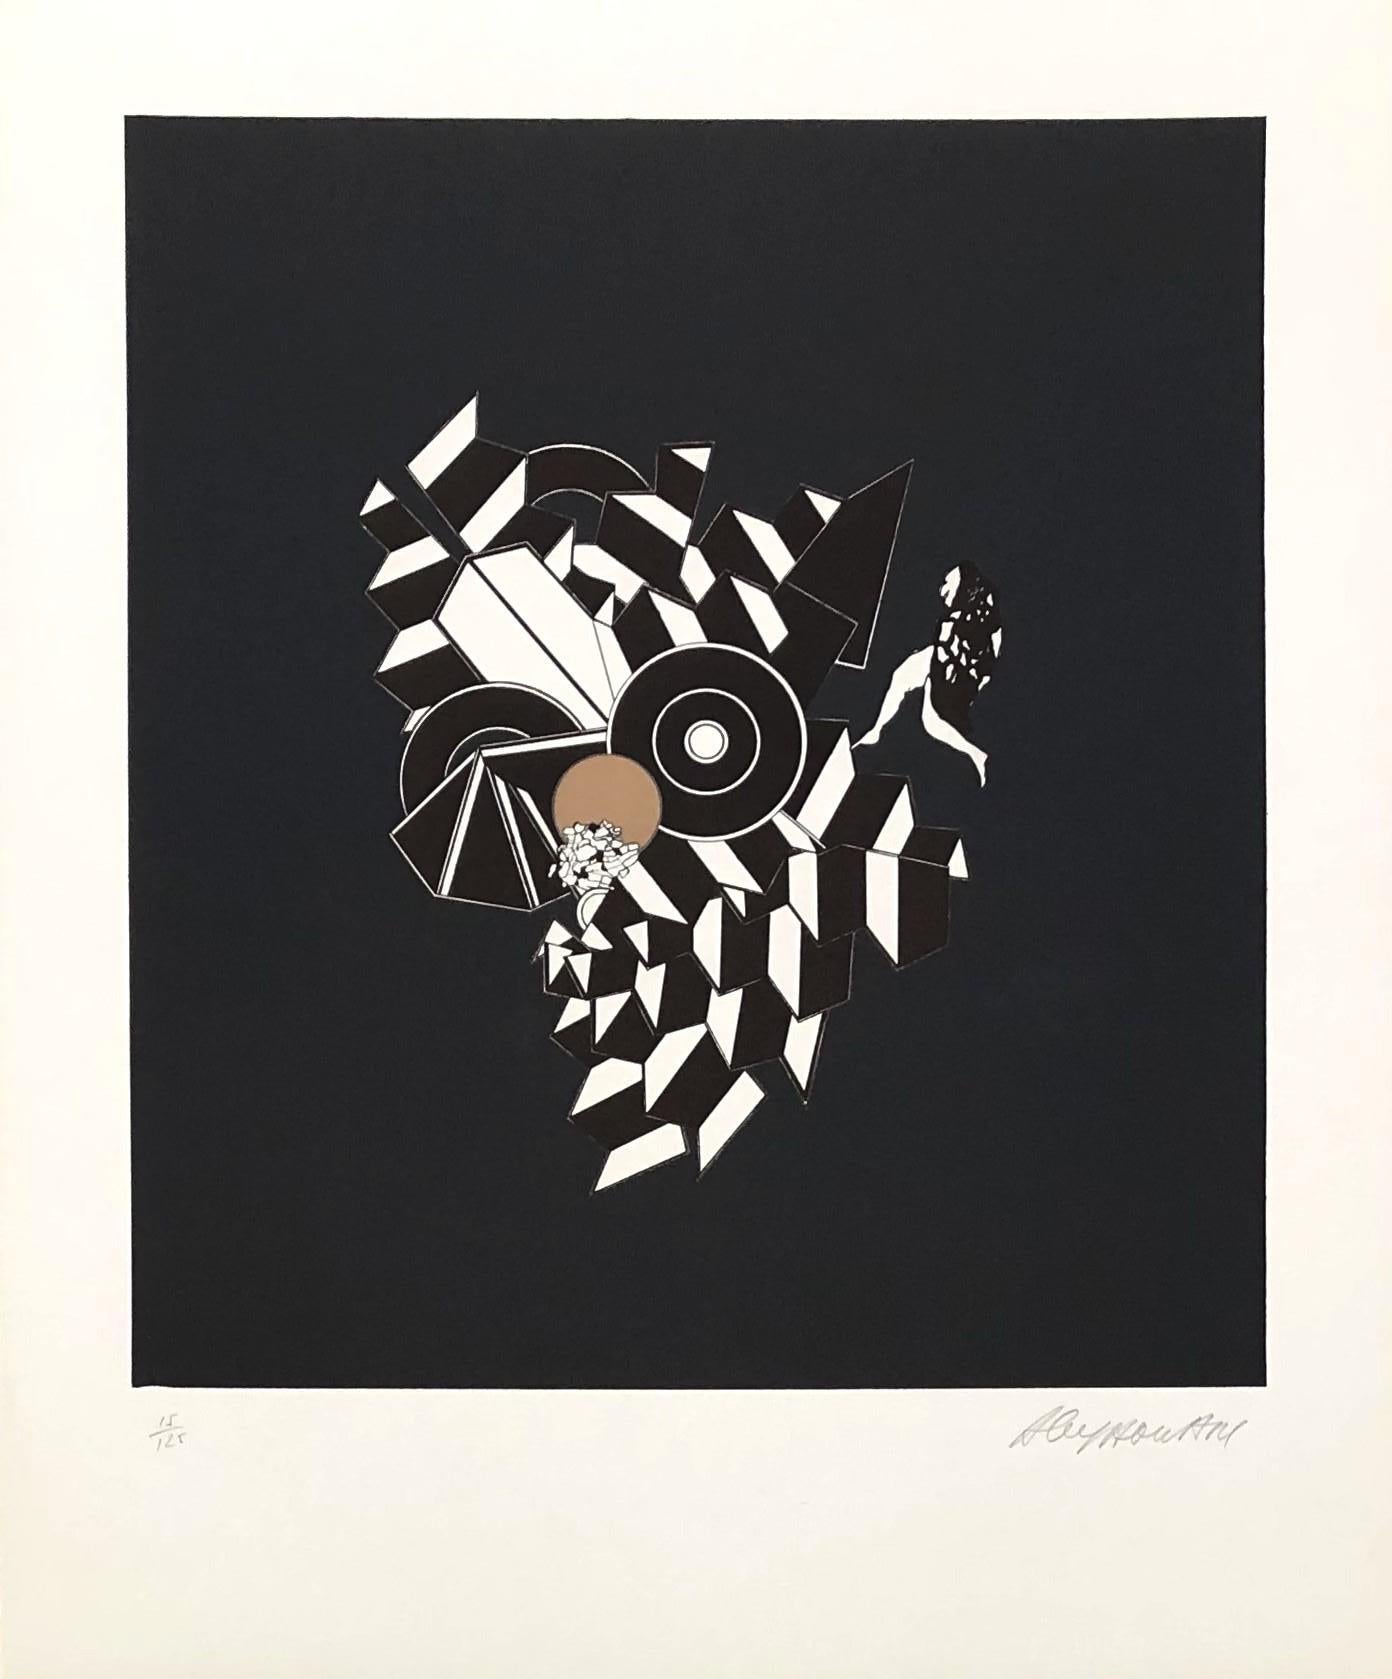 Alain Le Yaouanc Abstract Print - Geometric Composition II - Original Lithograph Handsigned - 125 copies